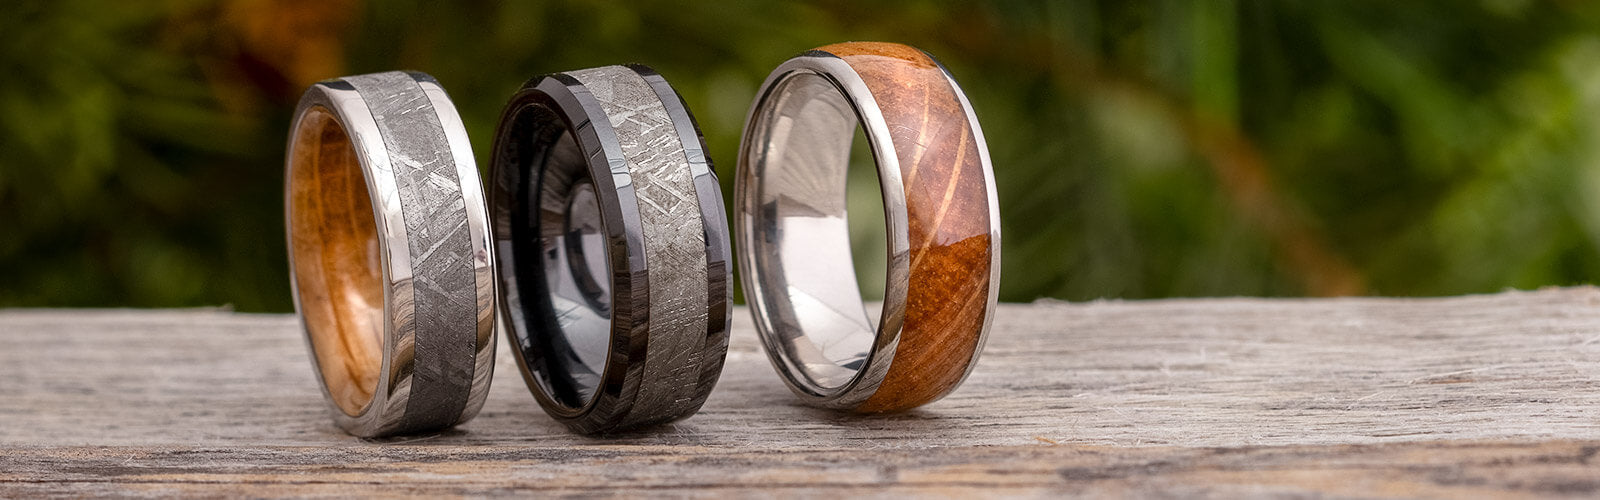 Unique men's wedding bands with meteorite and wood